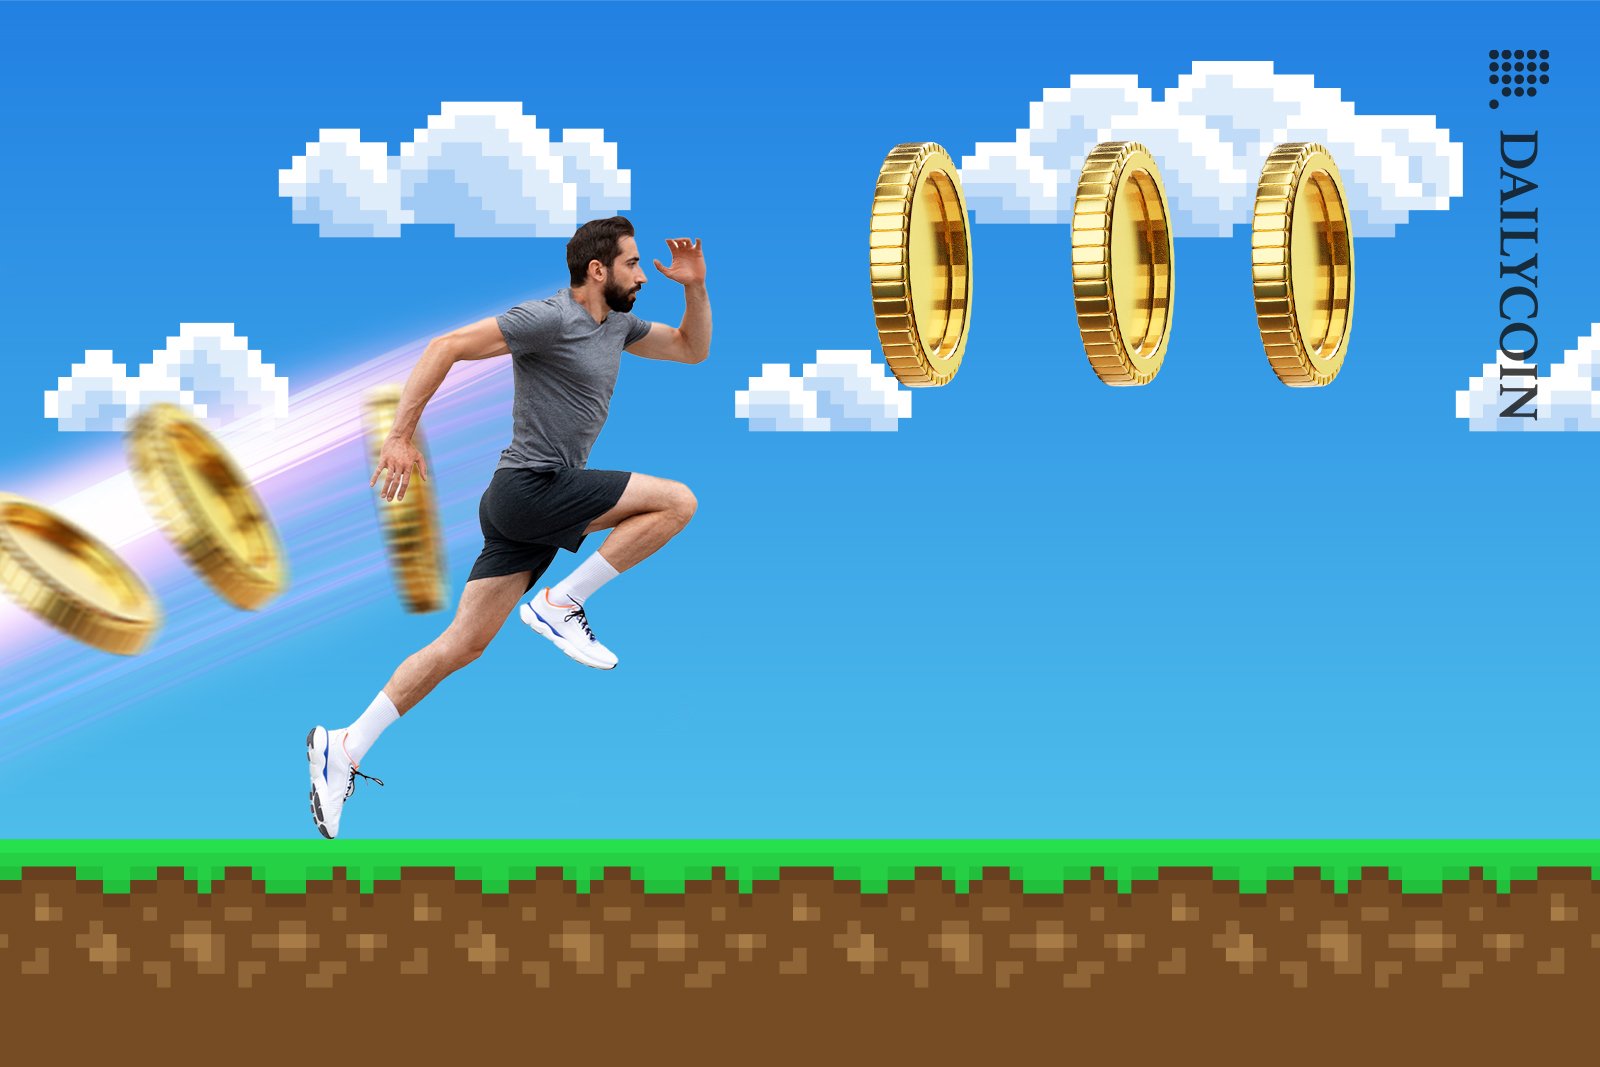 A man running inside a Mario game to collect gold crypto coins.